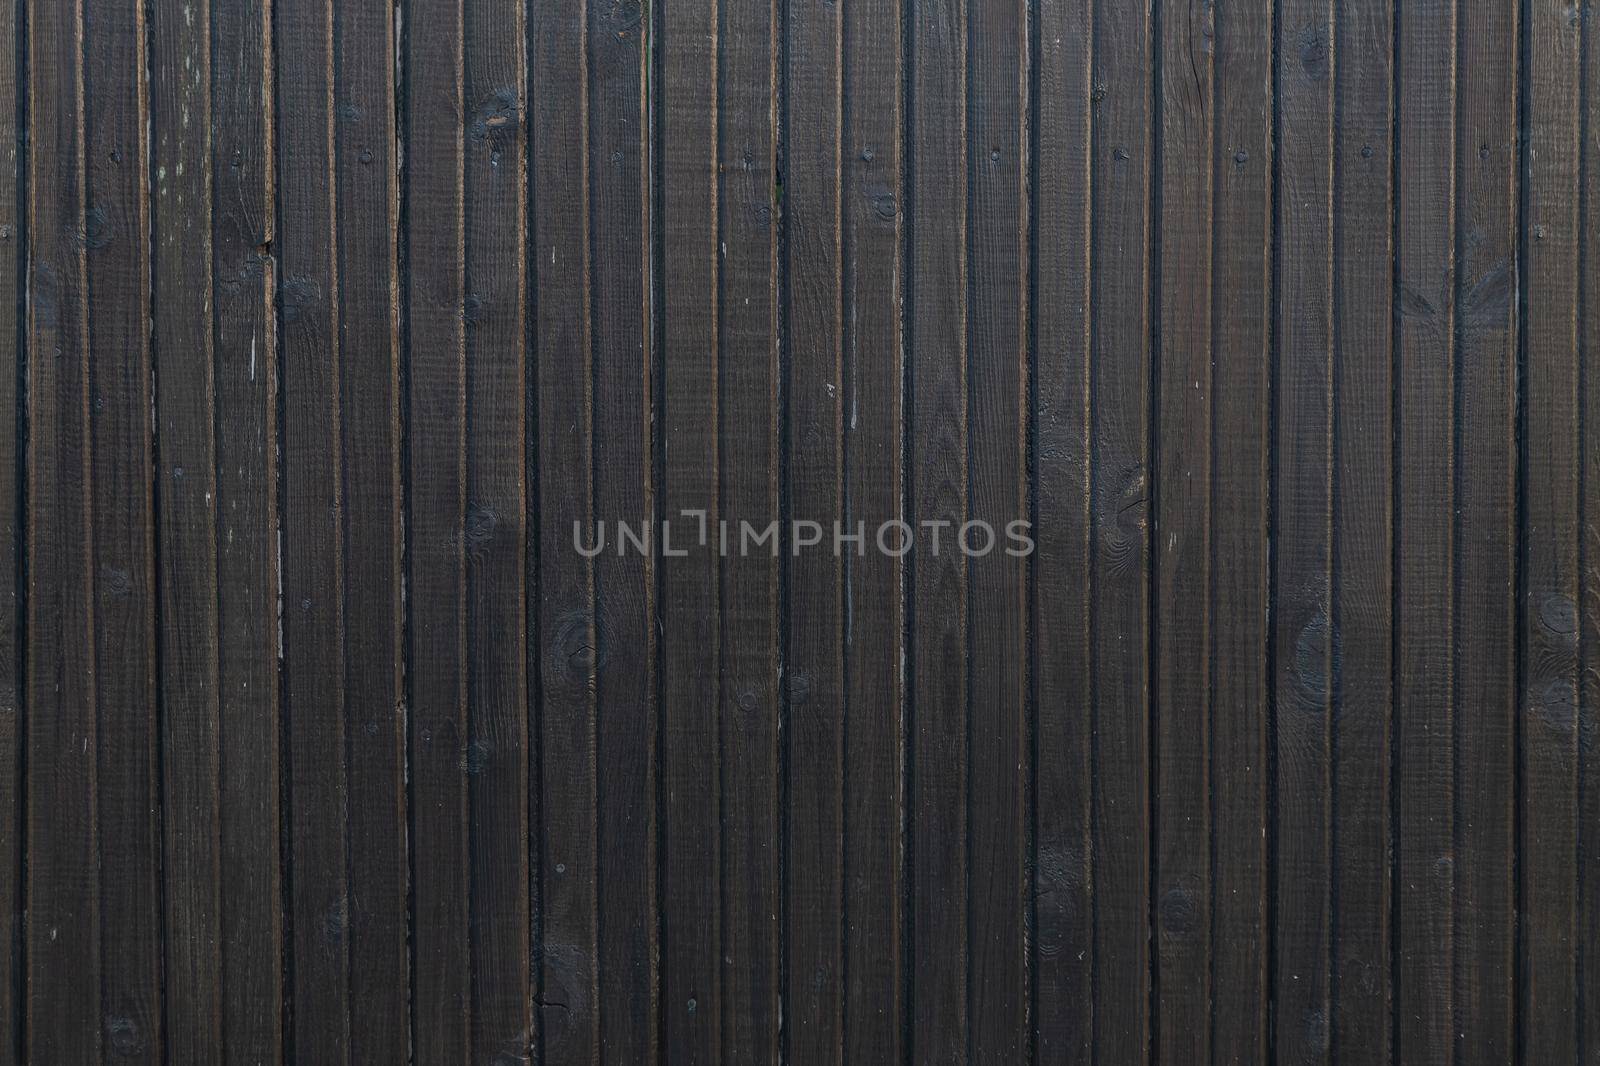 Background textures of old wooden boards used for the background Background textures of old wooden boards used for background and drawing images